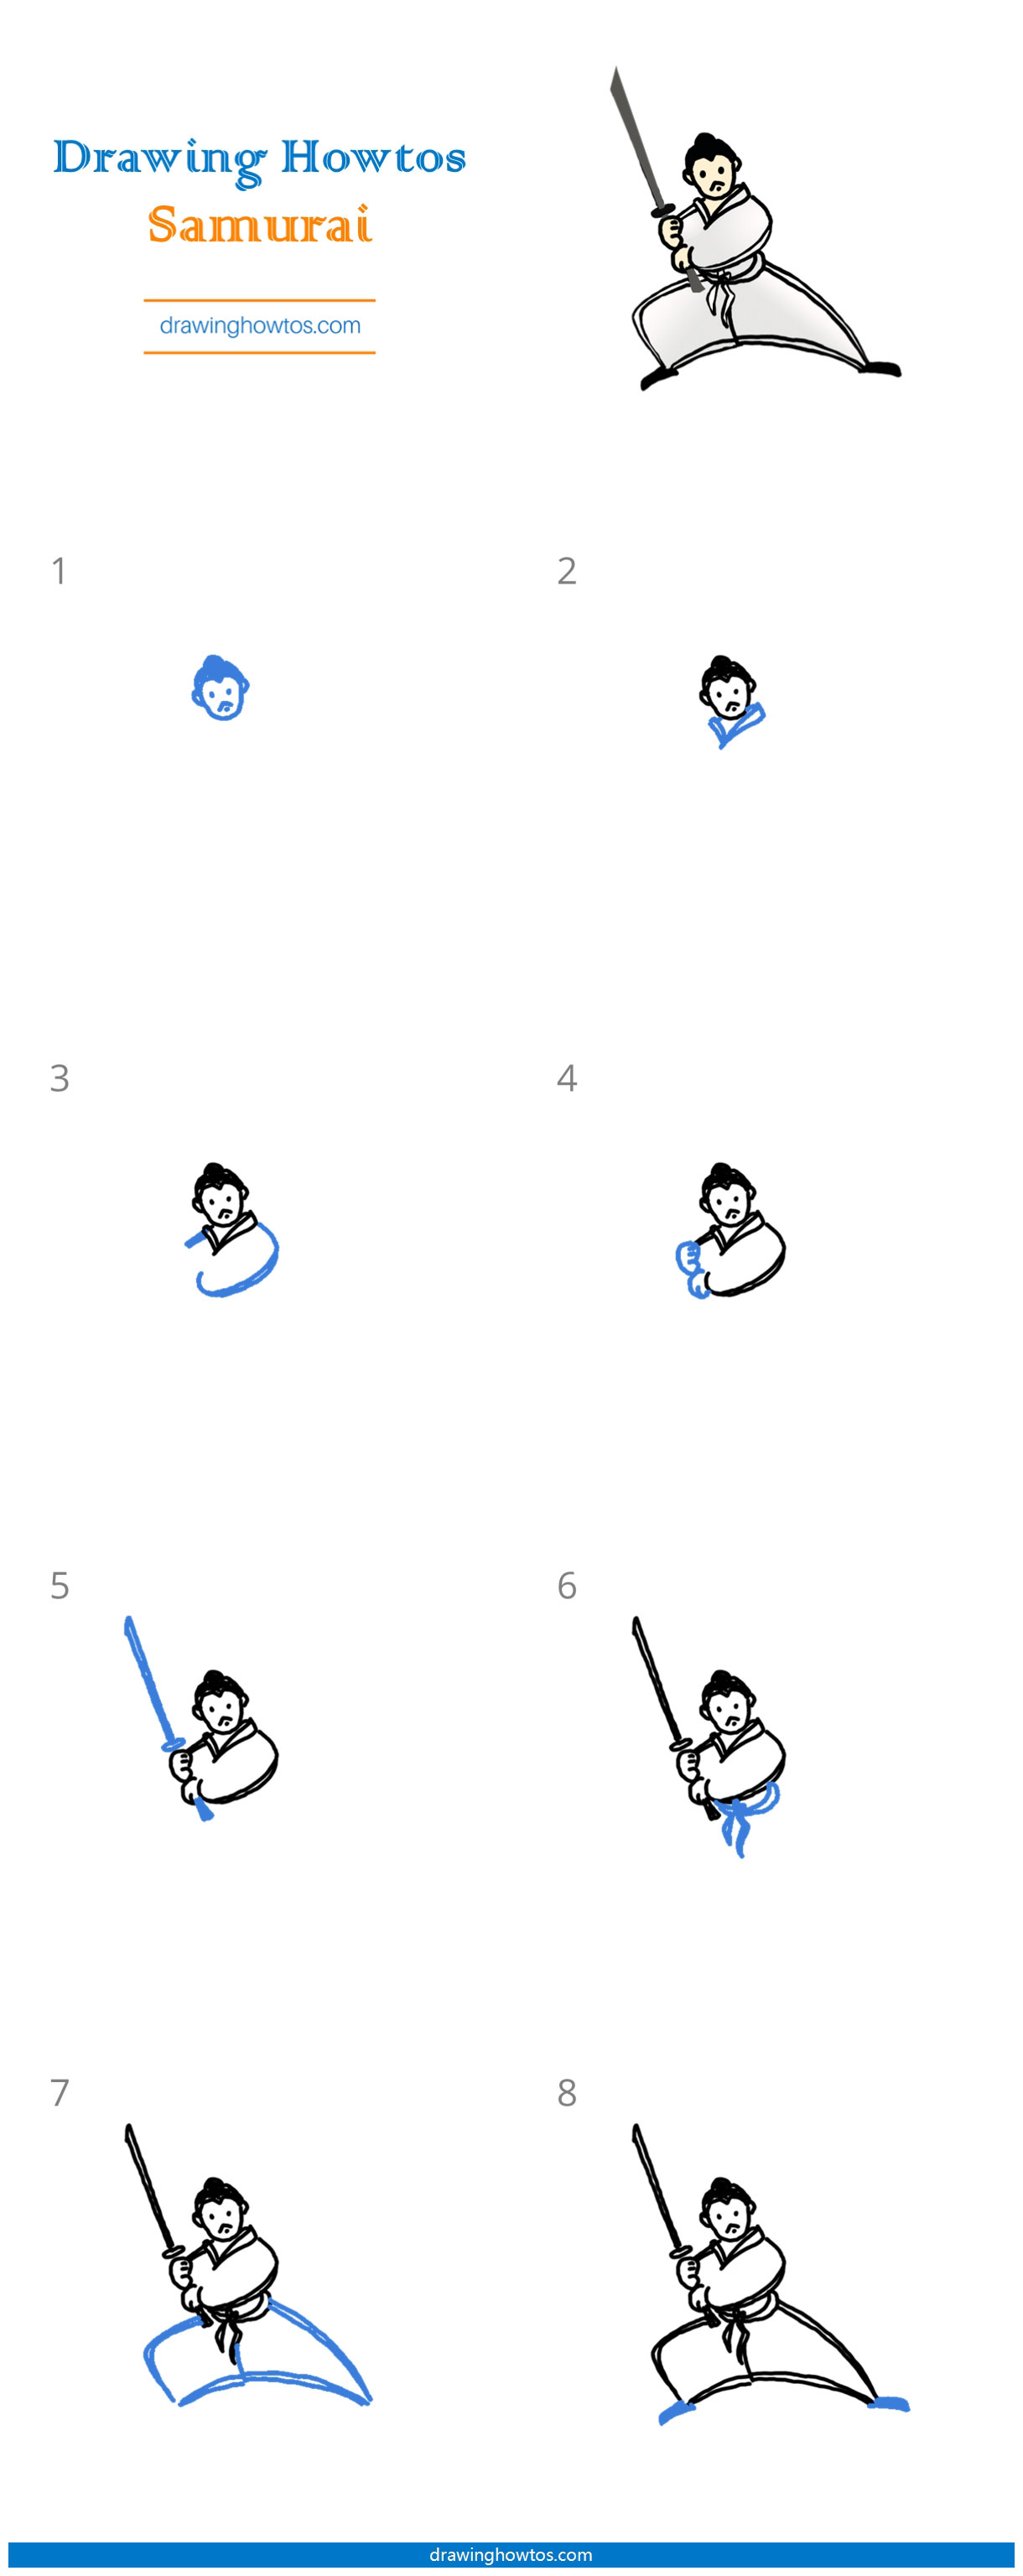 How to Draw a Samurai Step by Step